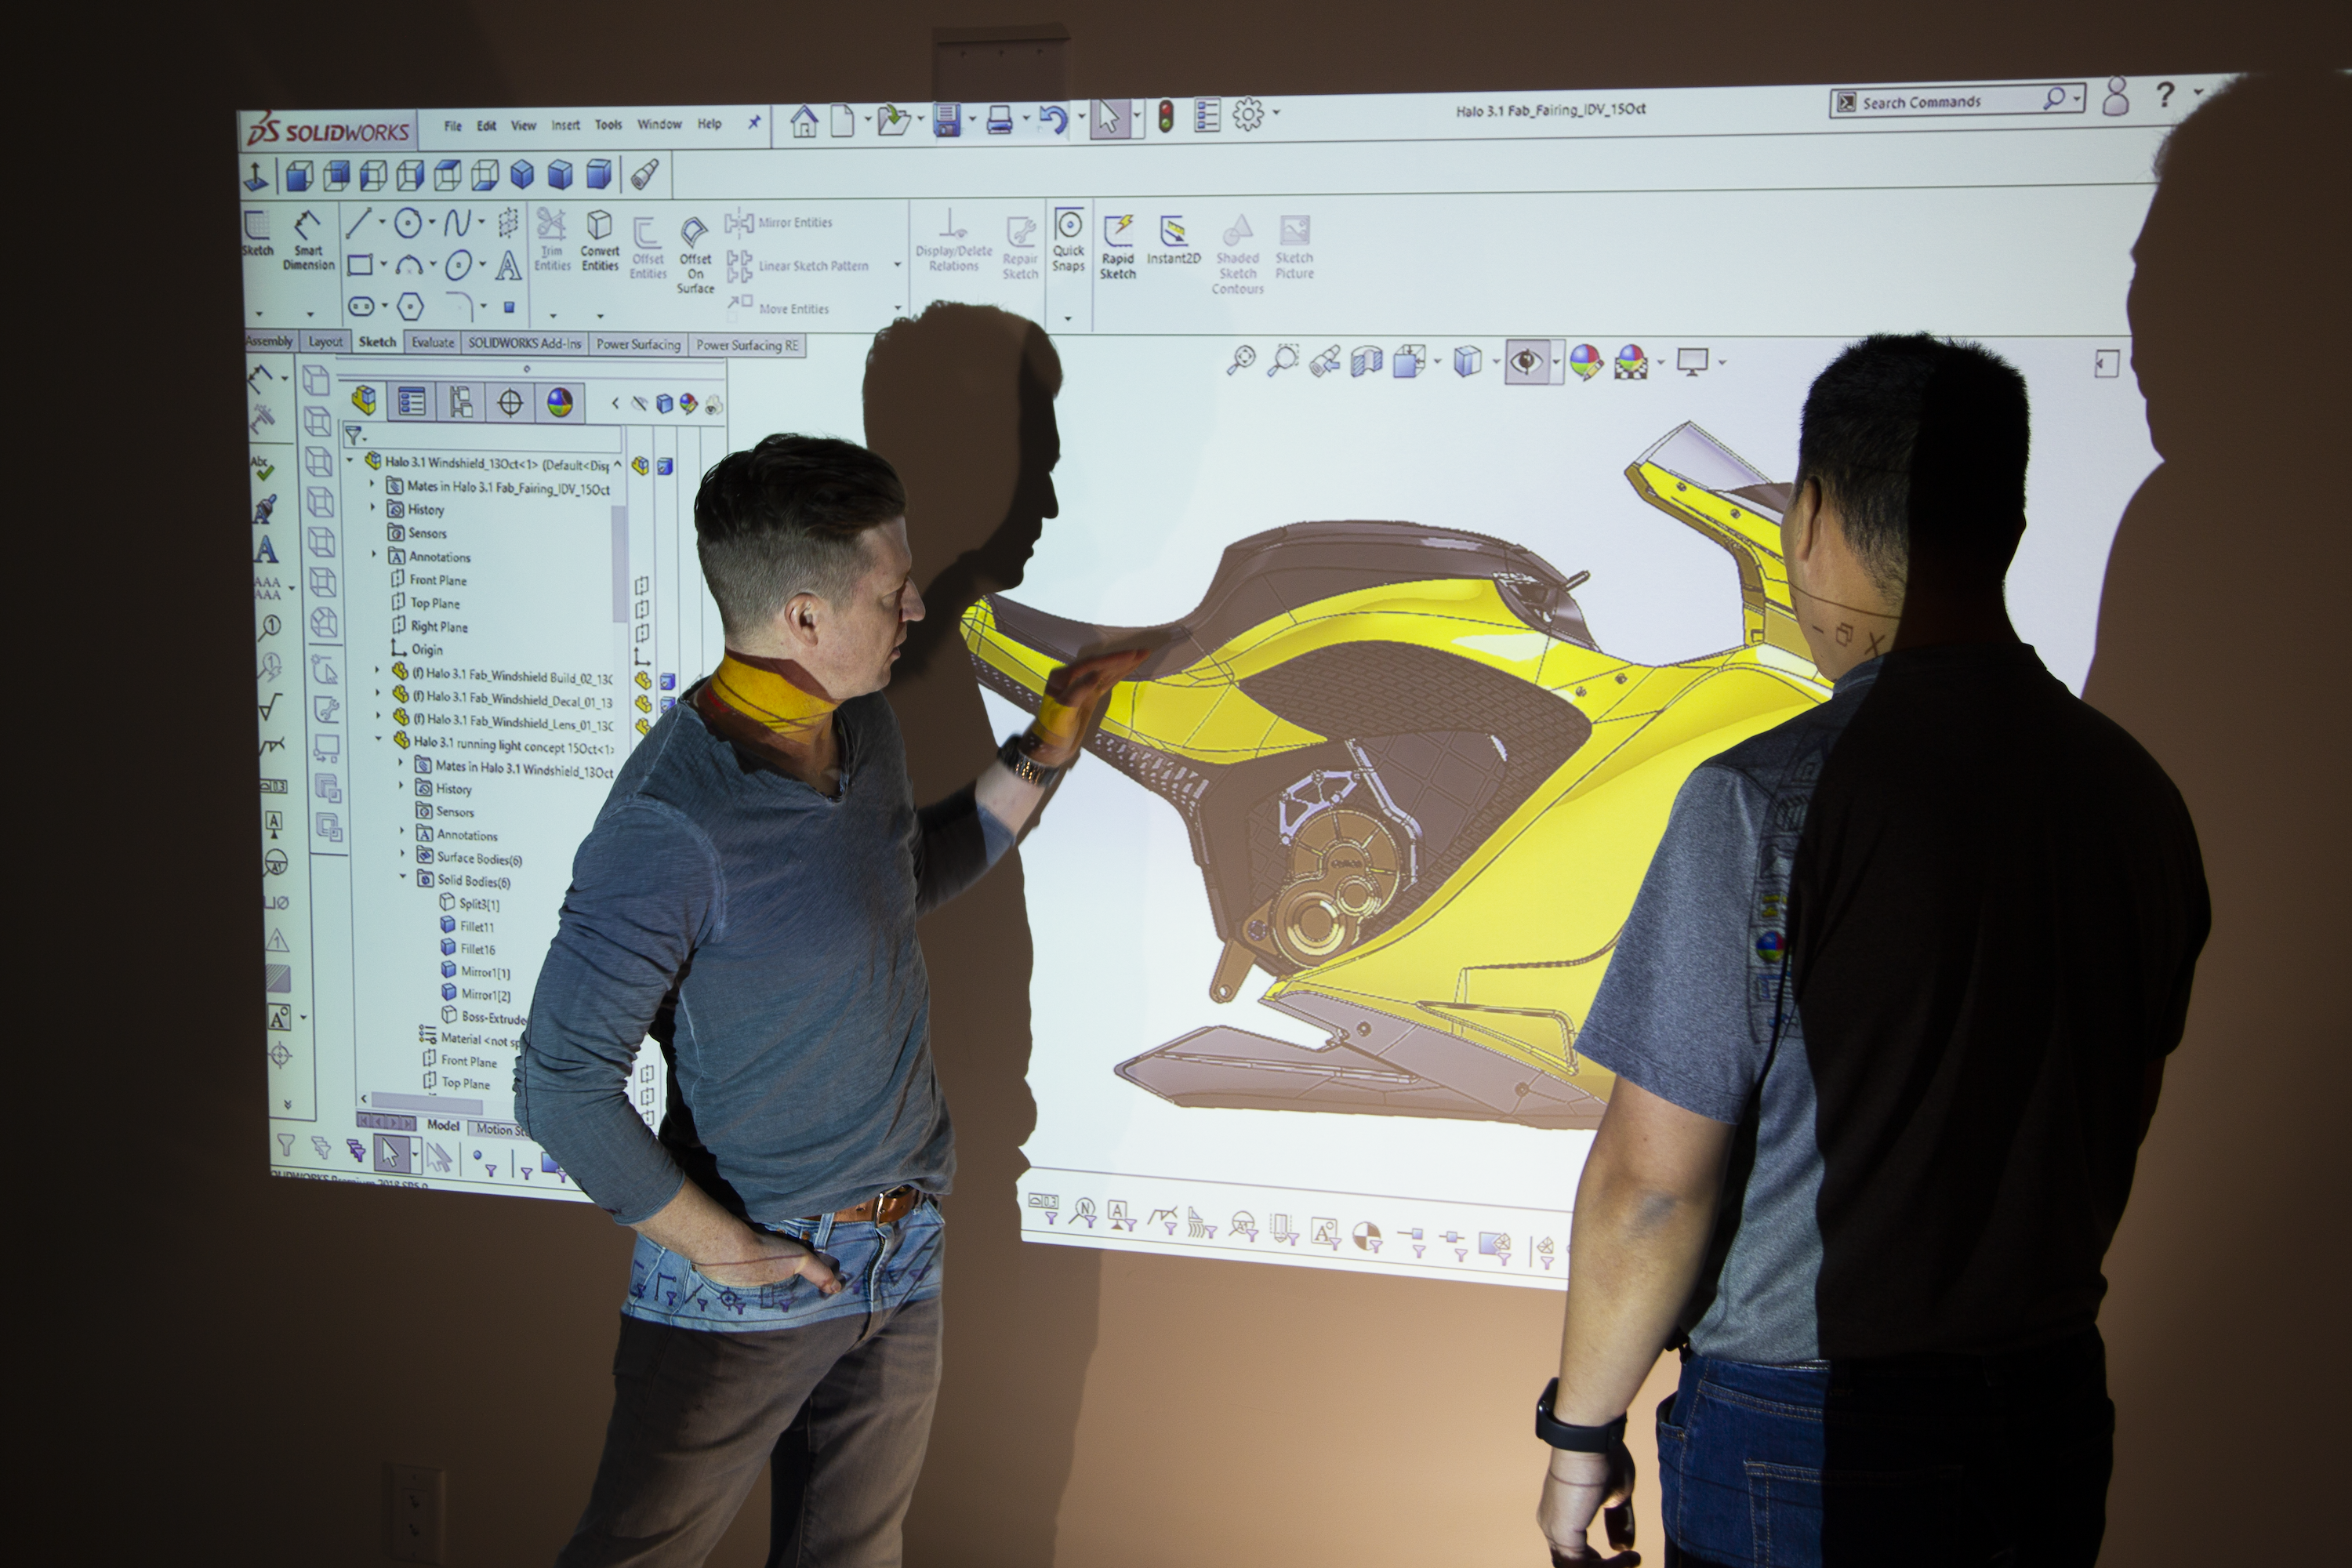 A projector screen showing the Damon HyperSport with CEO Jay Jiraud indicating certain features